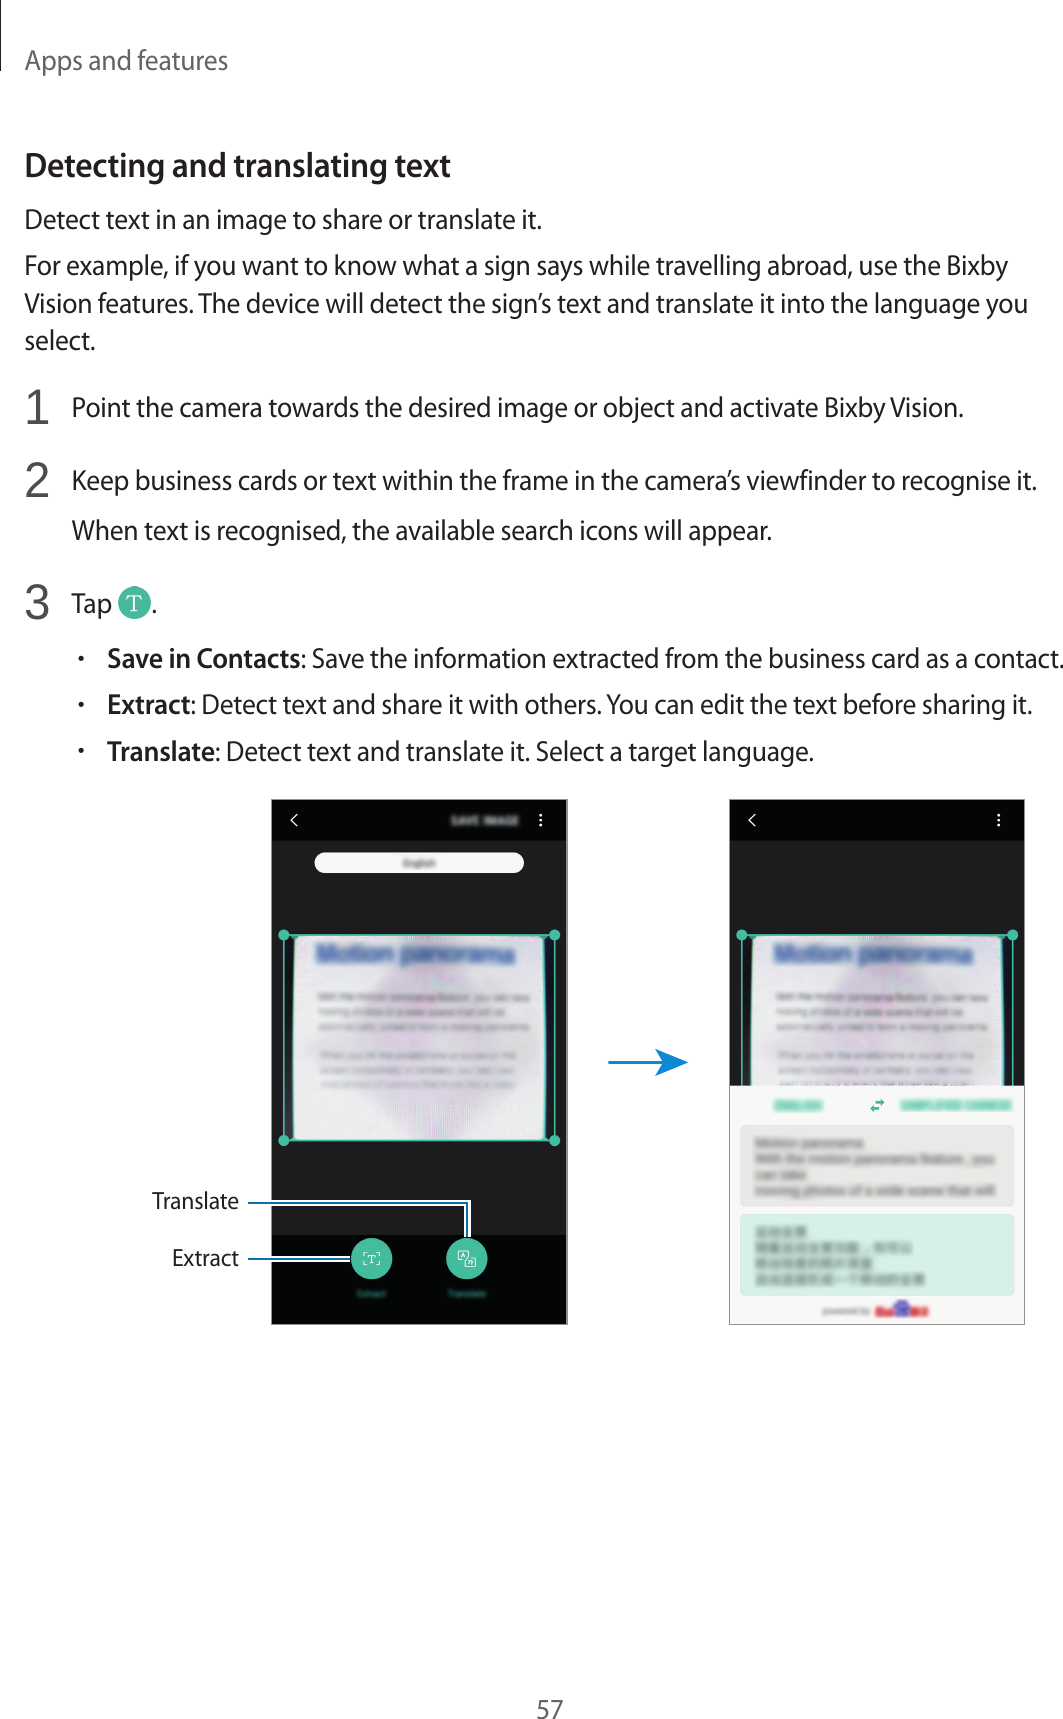 Apps and features57Detecting and translating textDetect text in an image to share or translate it.For example, if you want to know what a sign says while travelling abroad, use the Bixby Vision features. The device will detect the sign’s text and translate it into the language you select.1  Point the camera towards the desired image or object and activate Bixby Vision.2  Keep business cards or text within the frame in the camera’s viewfinder to recognise it.When text is recognised, the available search icons will appear.3  Tap  .•Save in Contacts: Save the information extracted from the business card as a contact.•Extract: Detect text and share it with others. You can edit the text before sharing it.•Translate: Detect text and translate it. Select a target language.ExtractTranslate